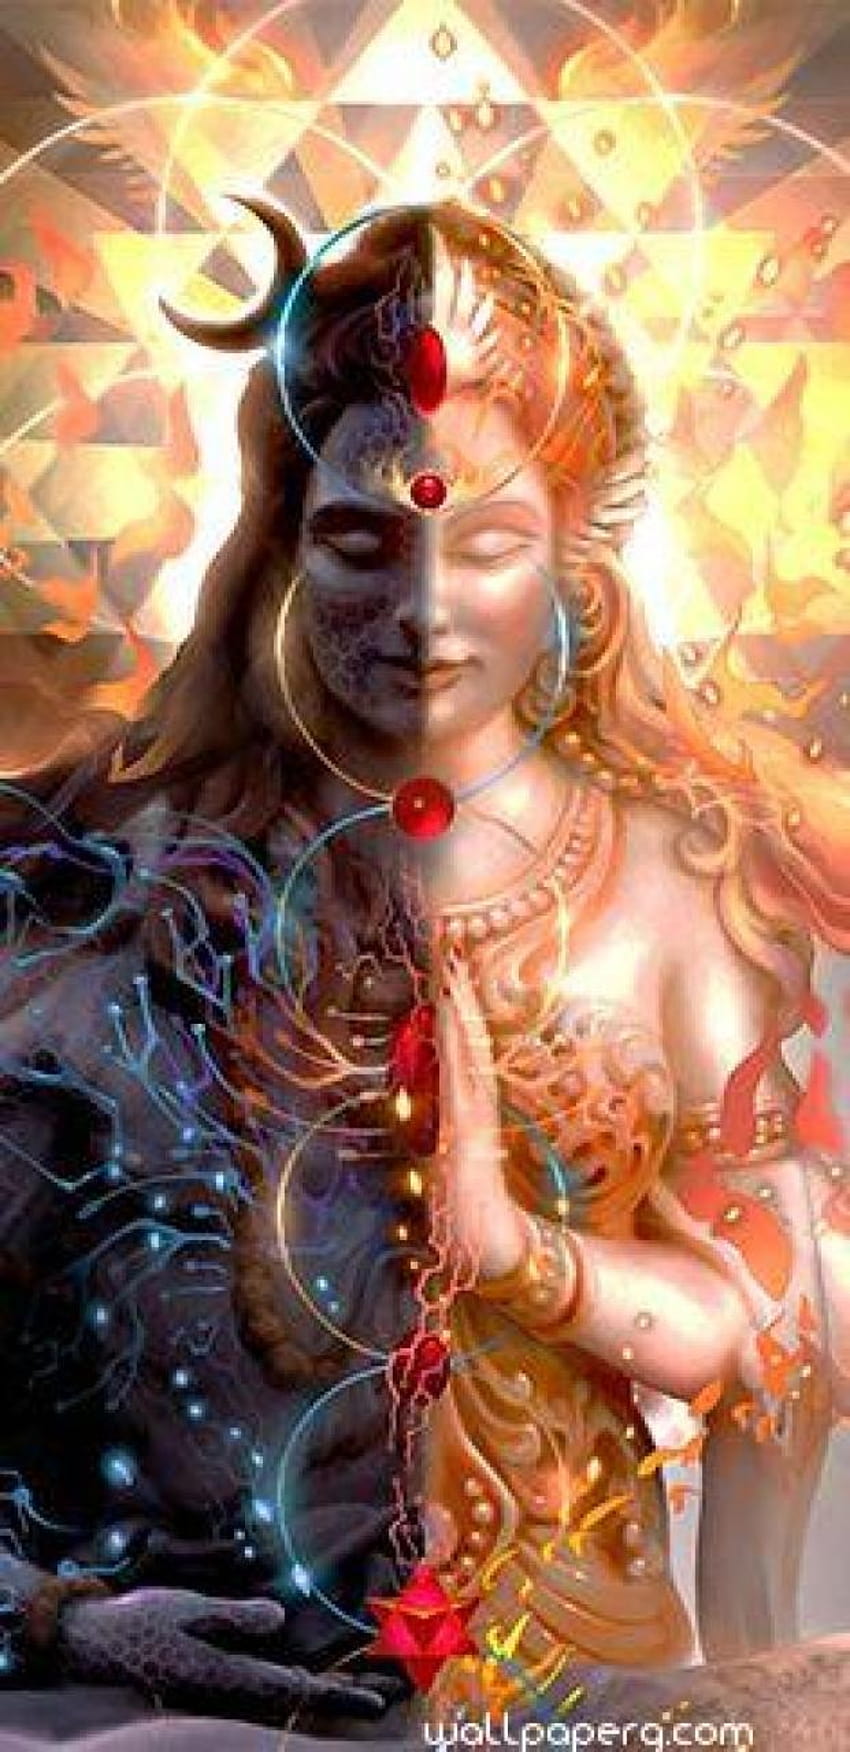 Lord shiva for mobile, lord shiva full mobile HD phone wallpaper ...